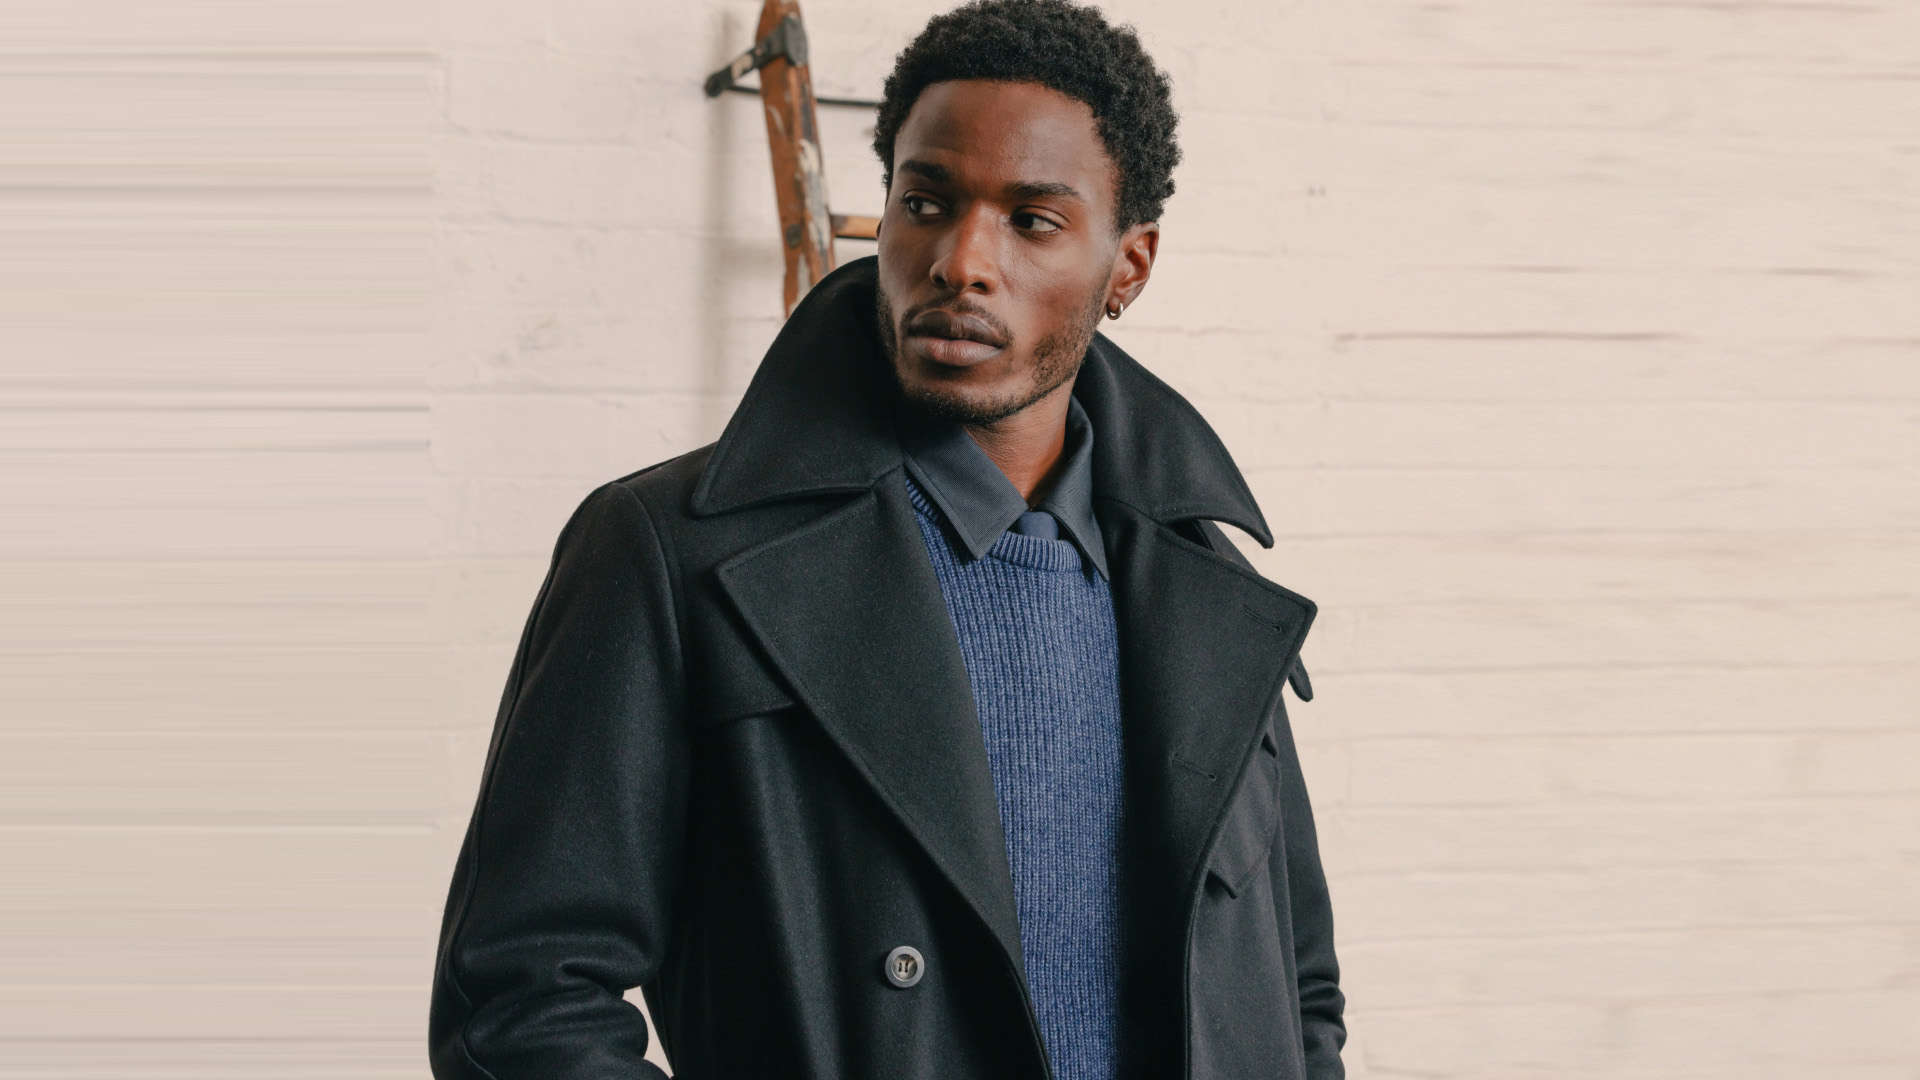 Mr Porter's 'The King's Man' Line Is Quintessential British Menswear